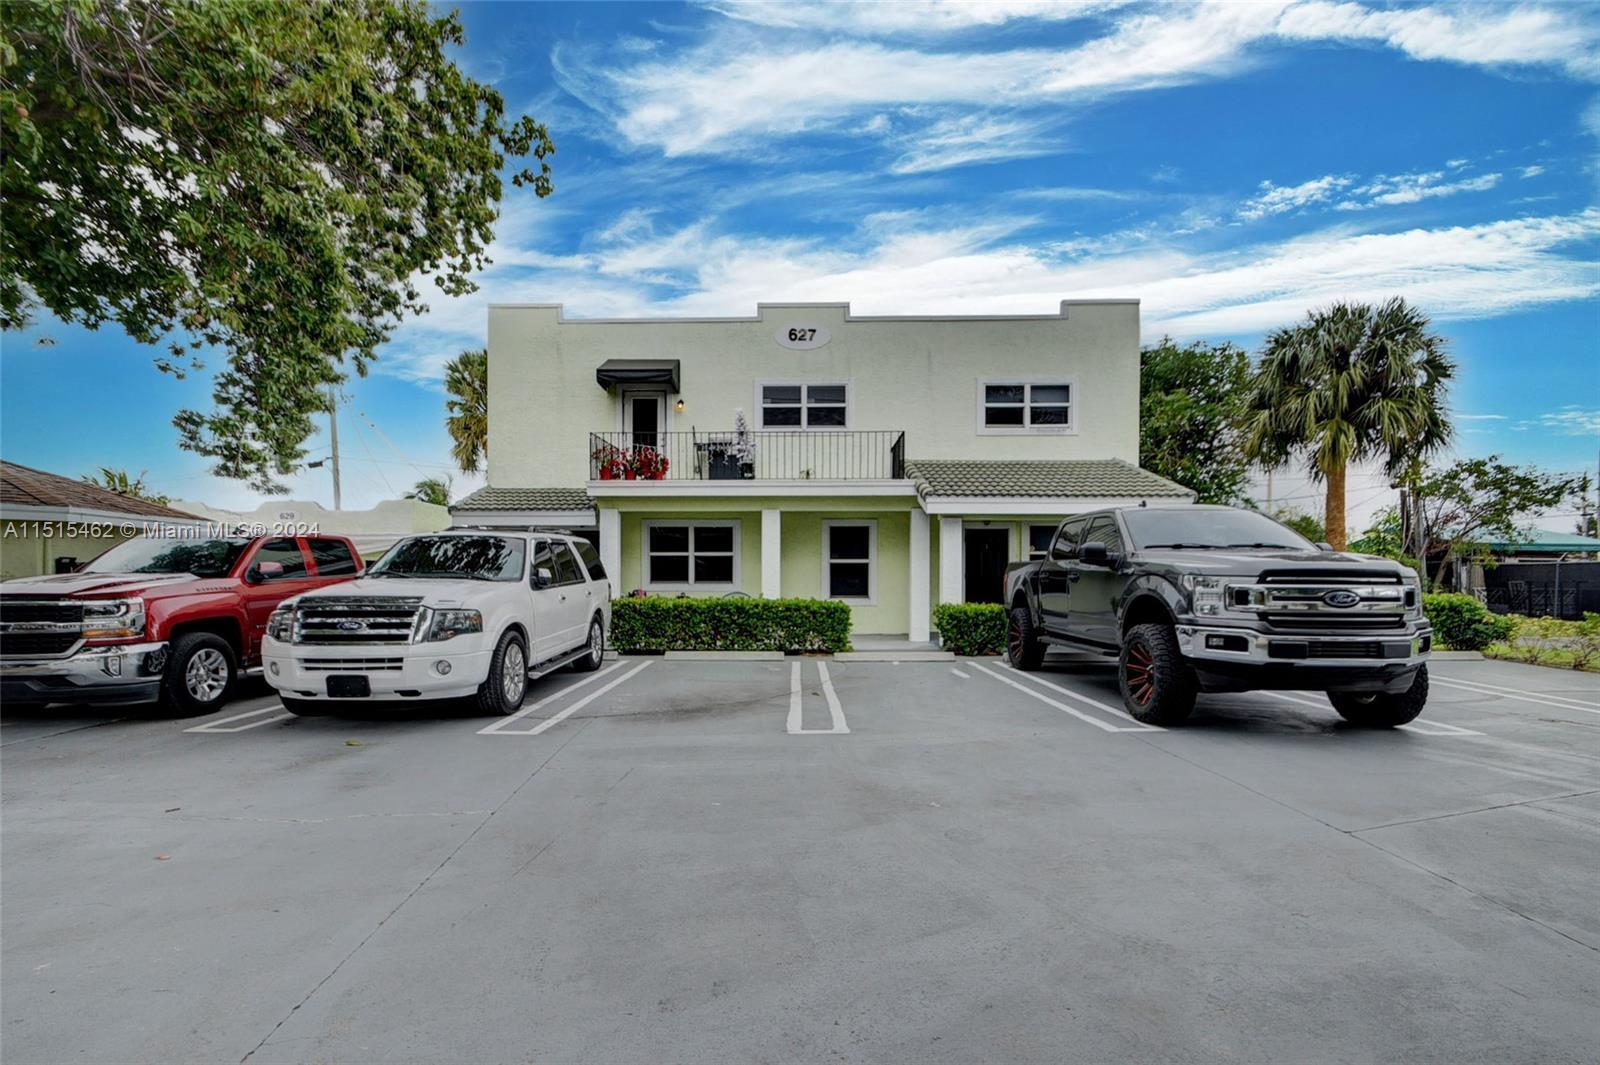 Photo of 627 Bunker Rd in West Palm Beach, FL